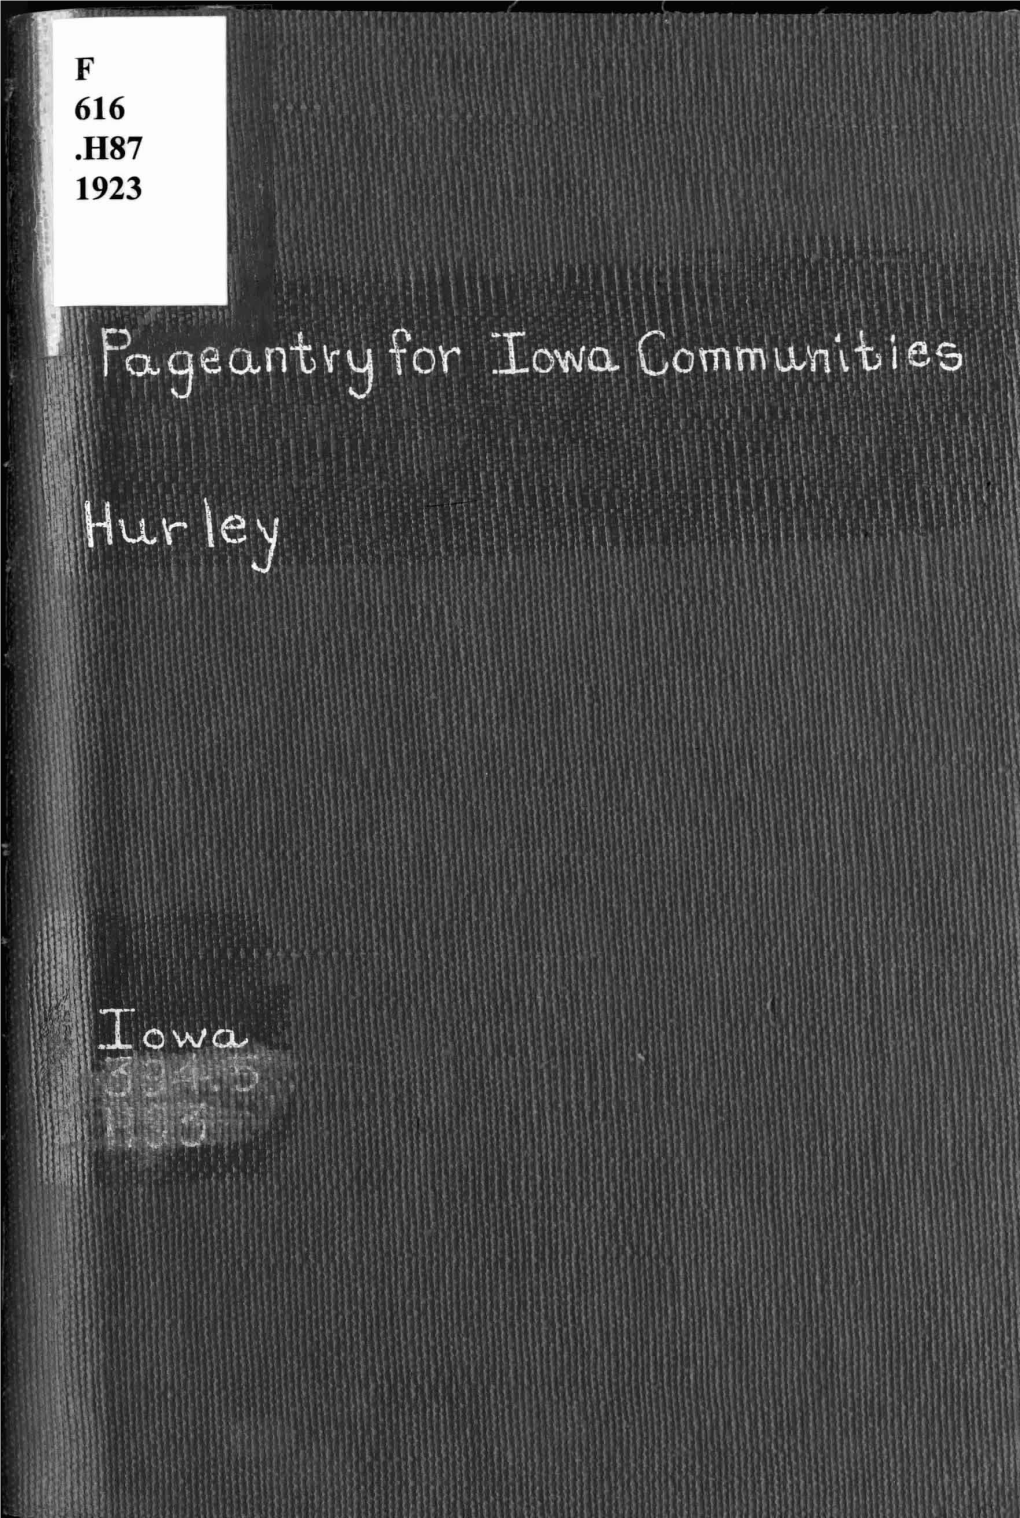 PAGEANTRY V for I0WA COMMUNITIES TRAVELING LIBRARY , of the STATE of IOWA Books Are Loaned to Communities